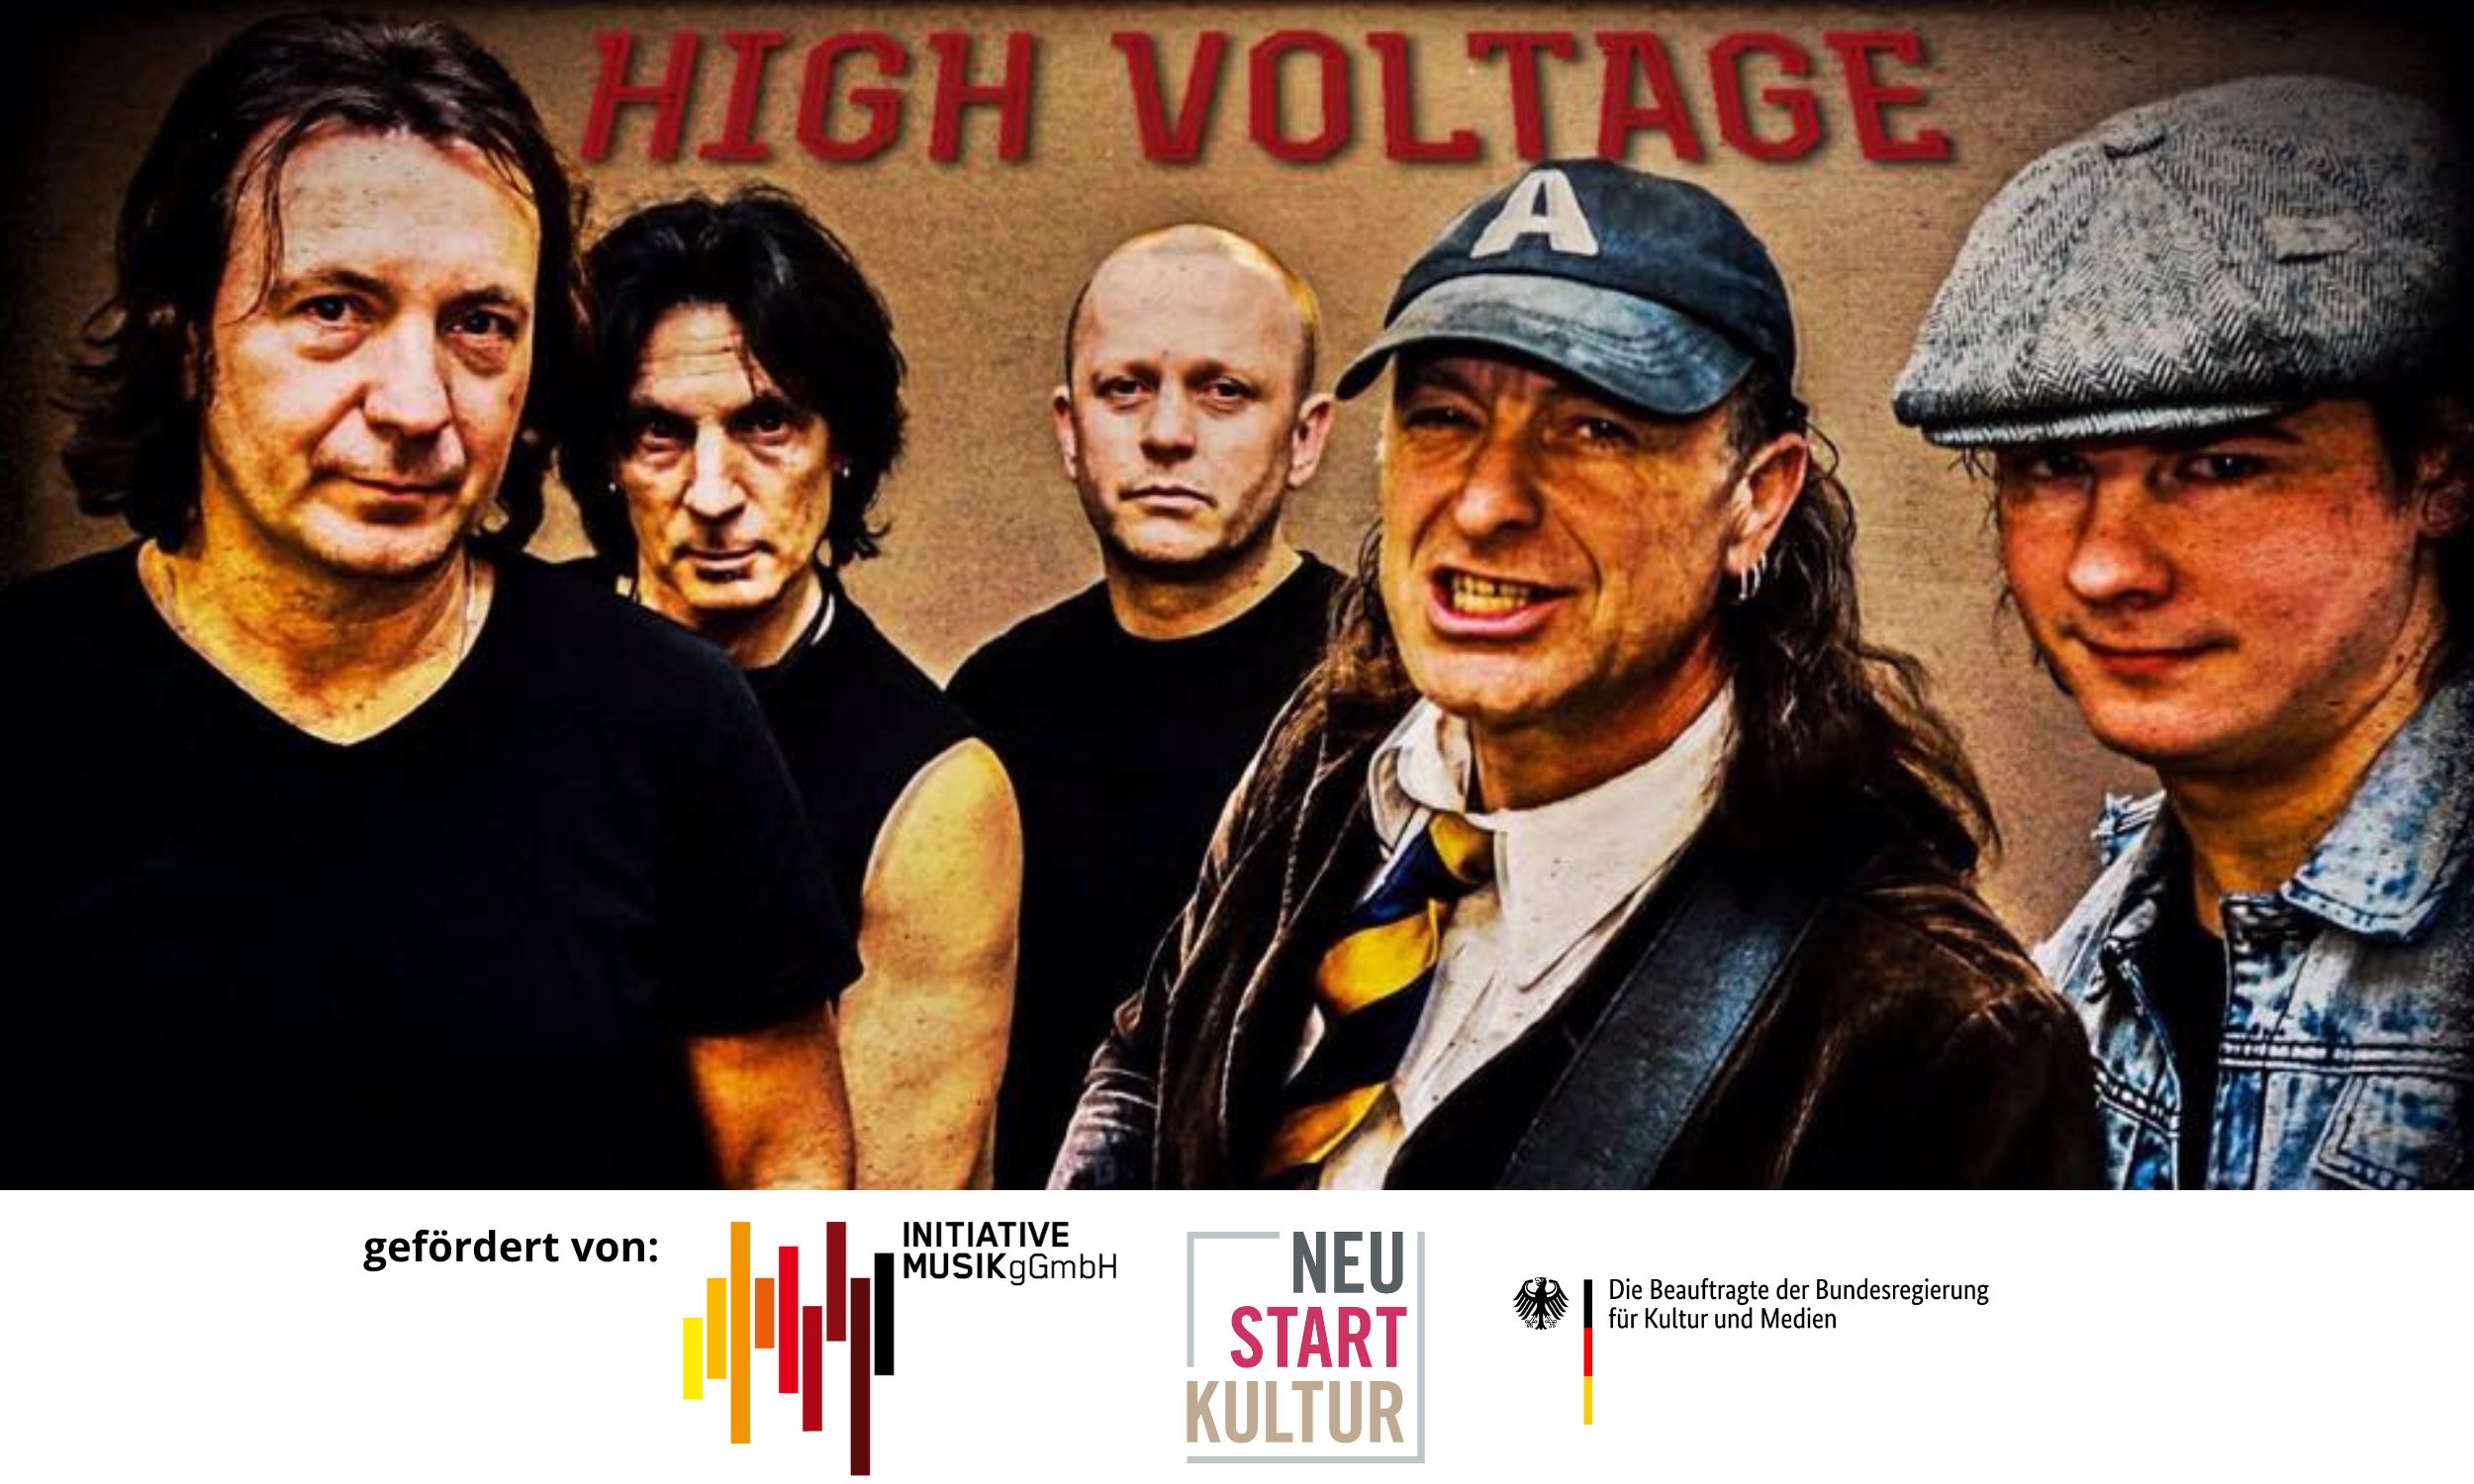 High Voltage - Tribute to AC/DC